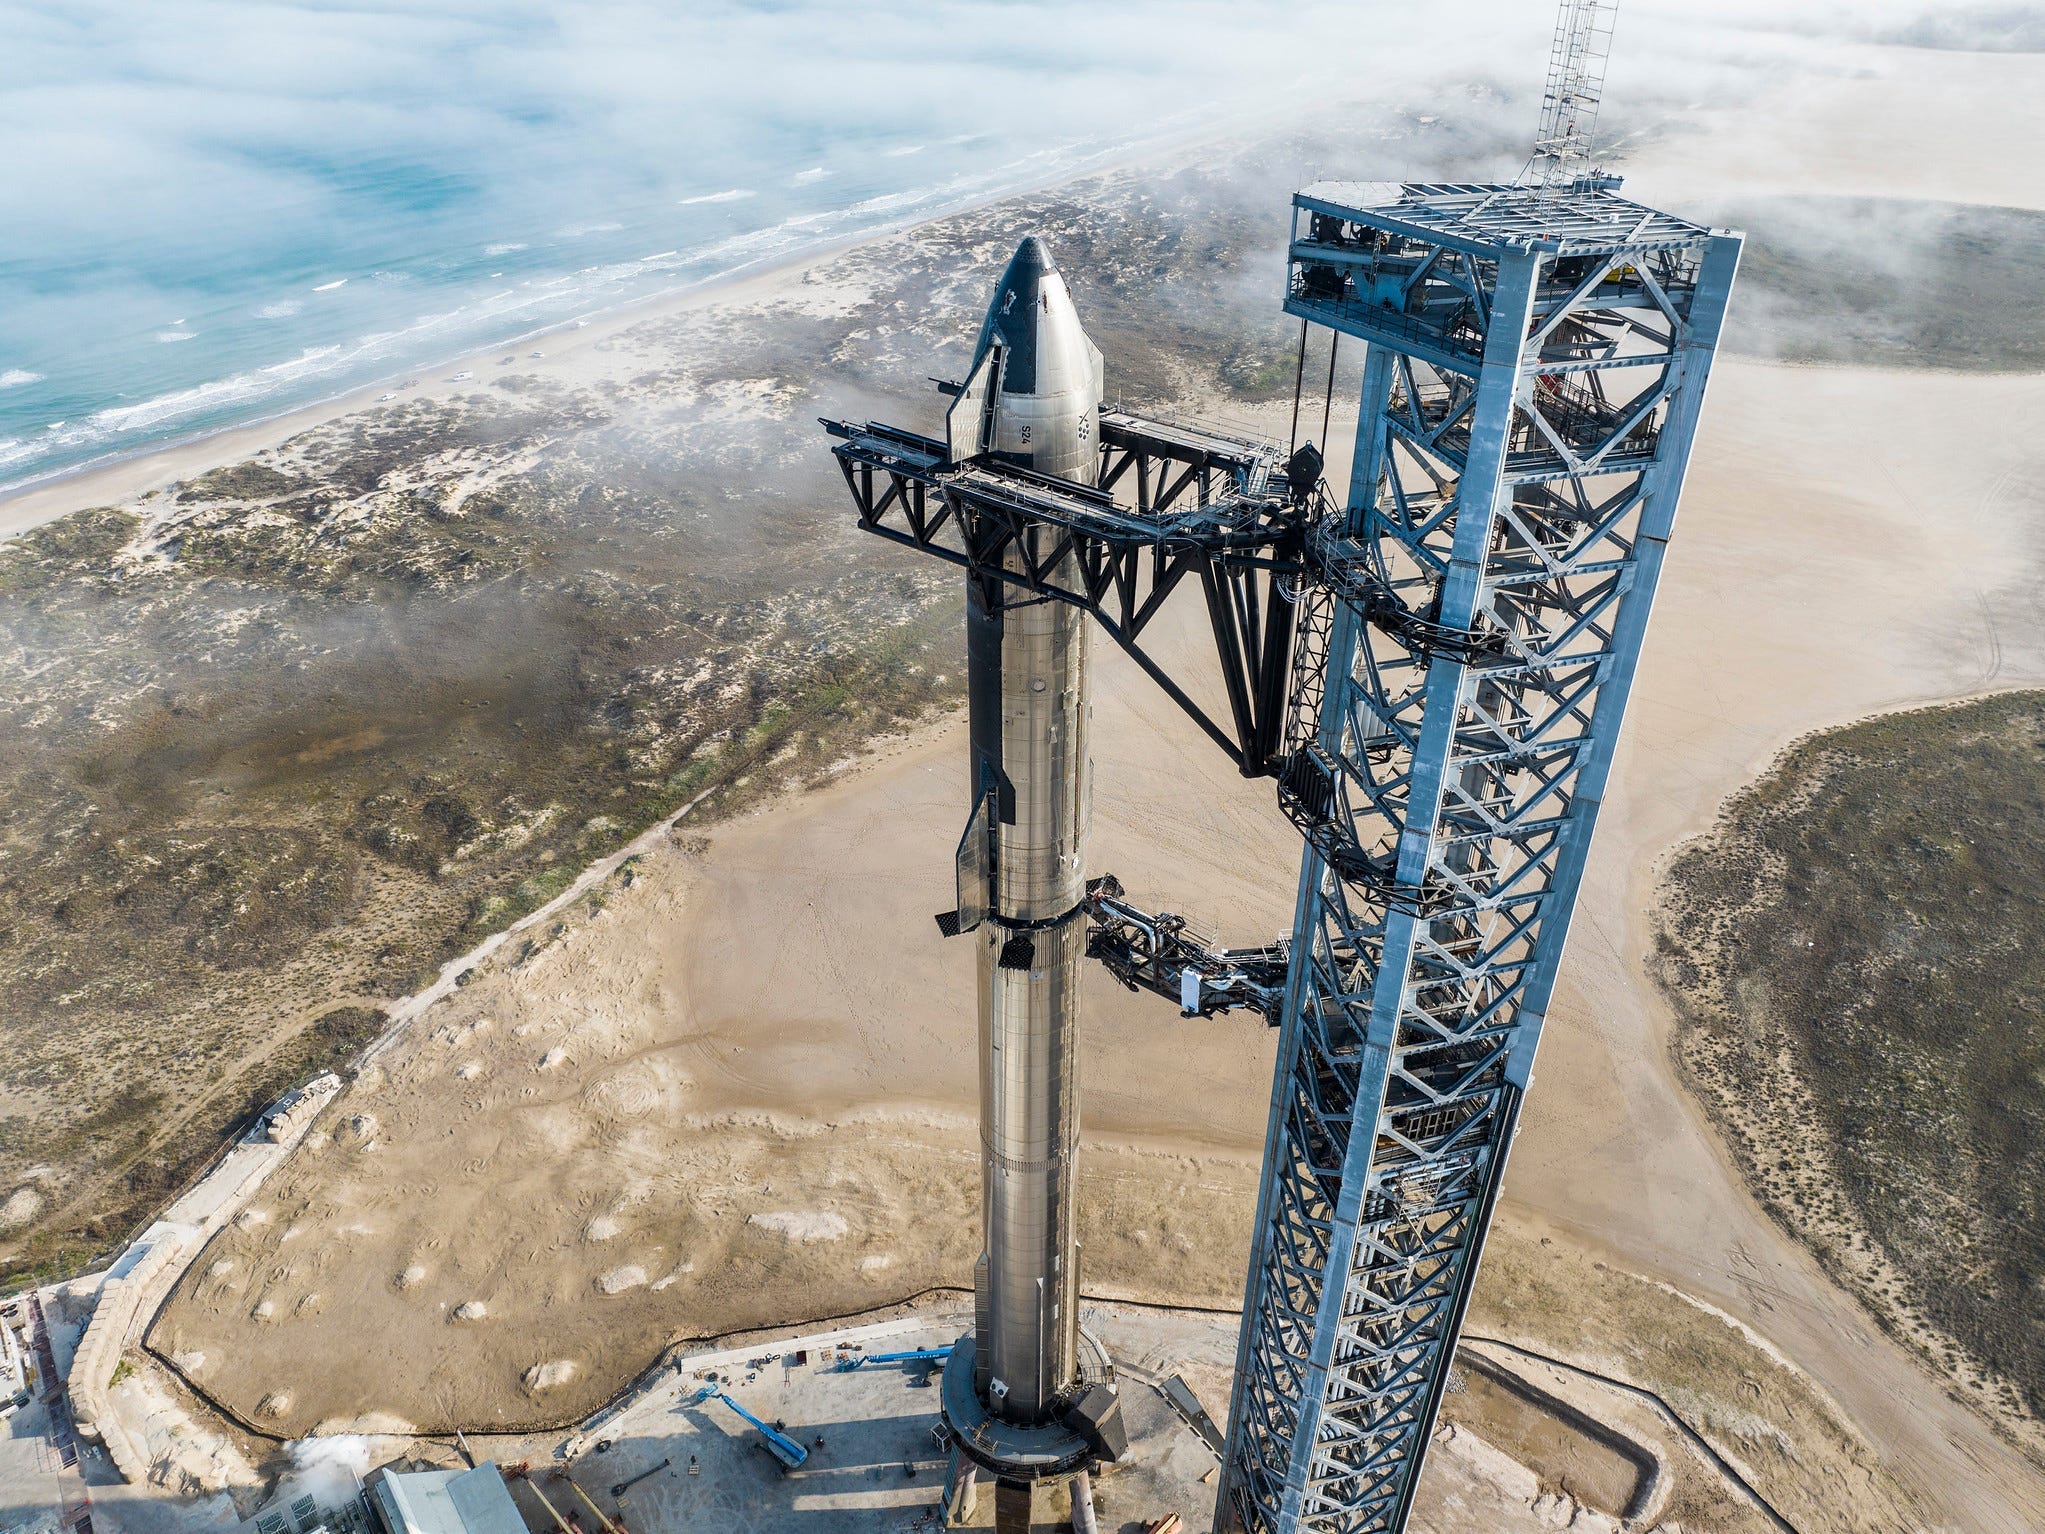 A picture from the top of the rocket shows how high it is next to the landscape.